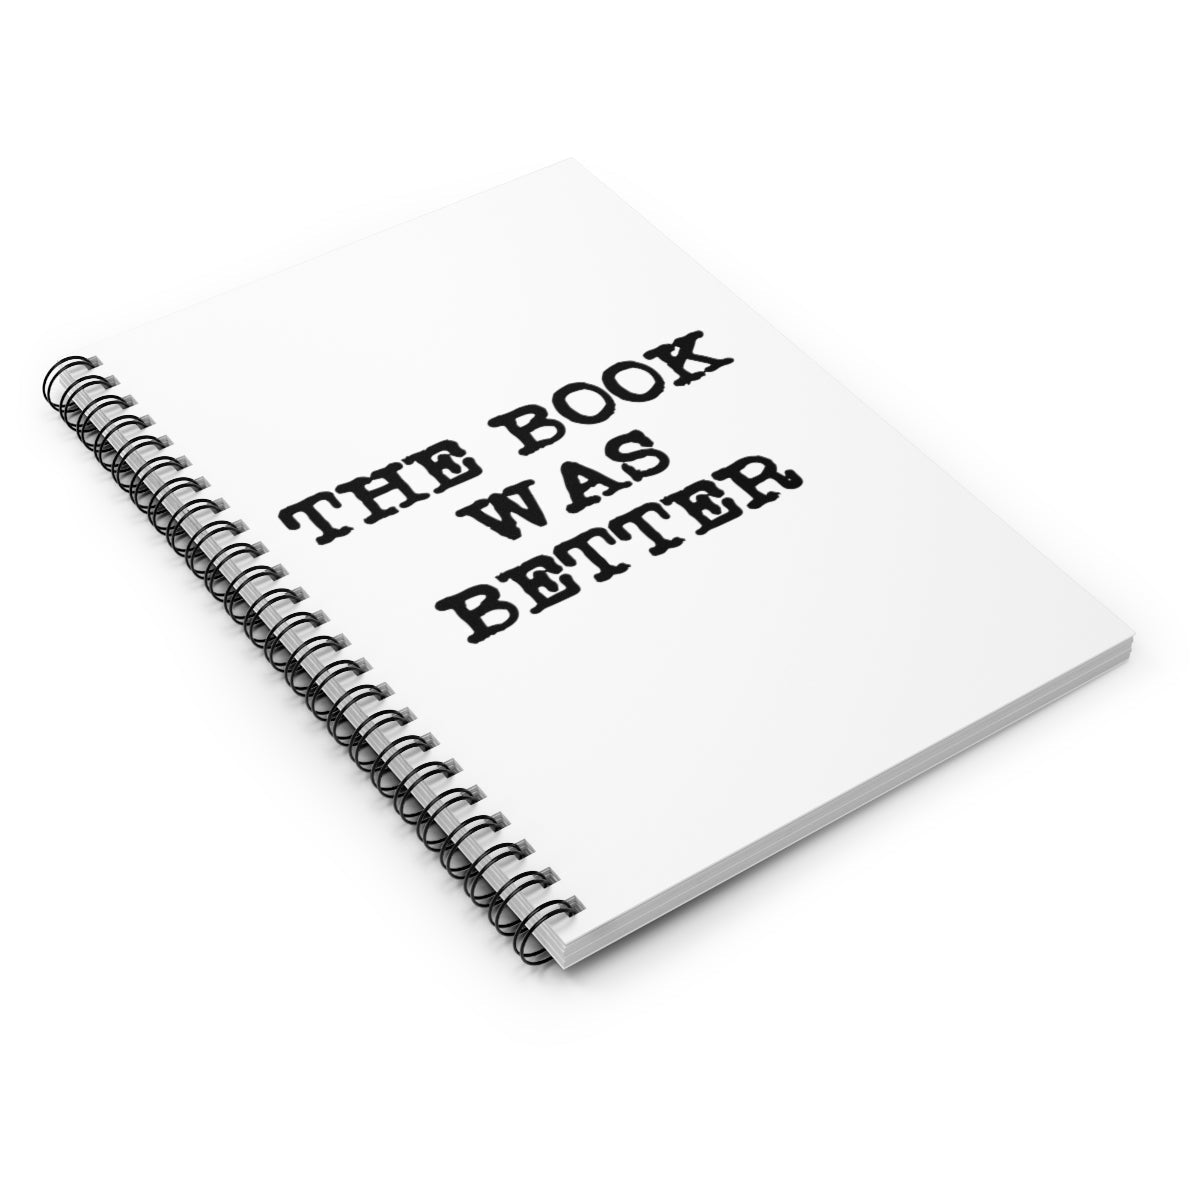 The Book Was Better Reading Educational Quotes Spiral Notebook - Ruled Line Ichaku [Perfect Gifts Selection]